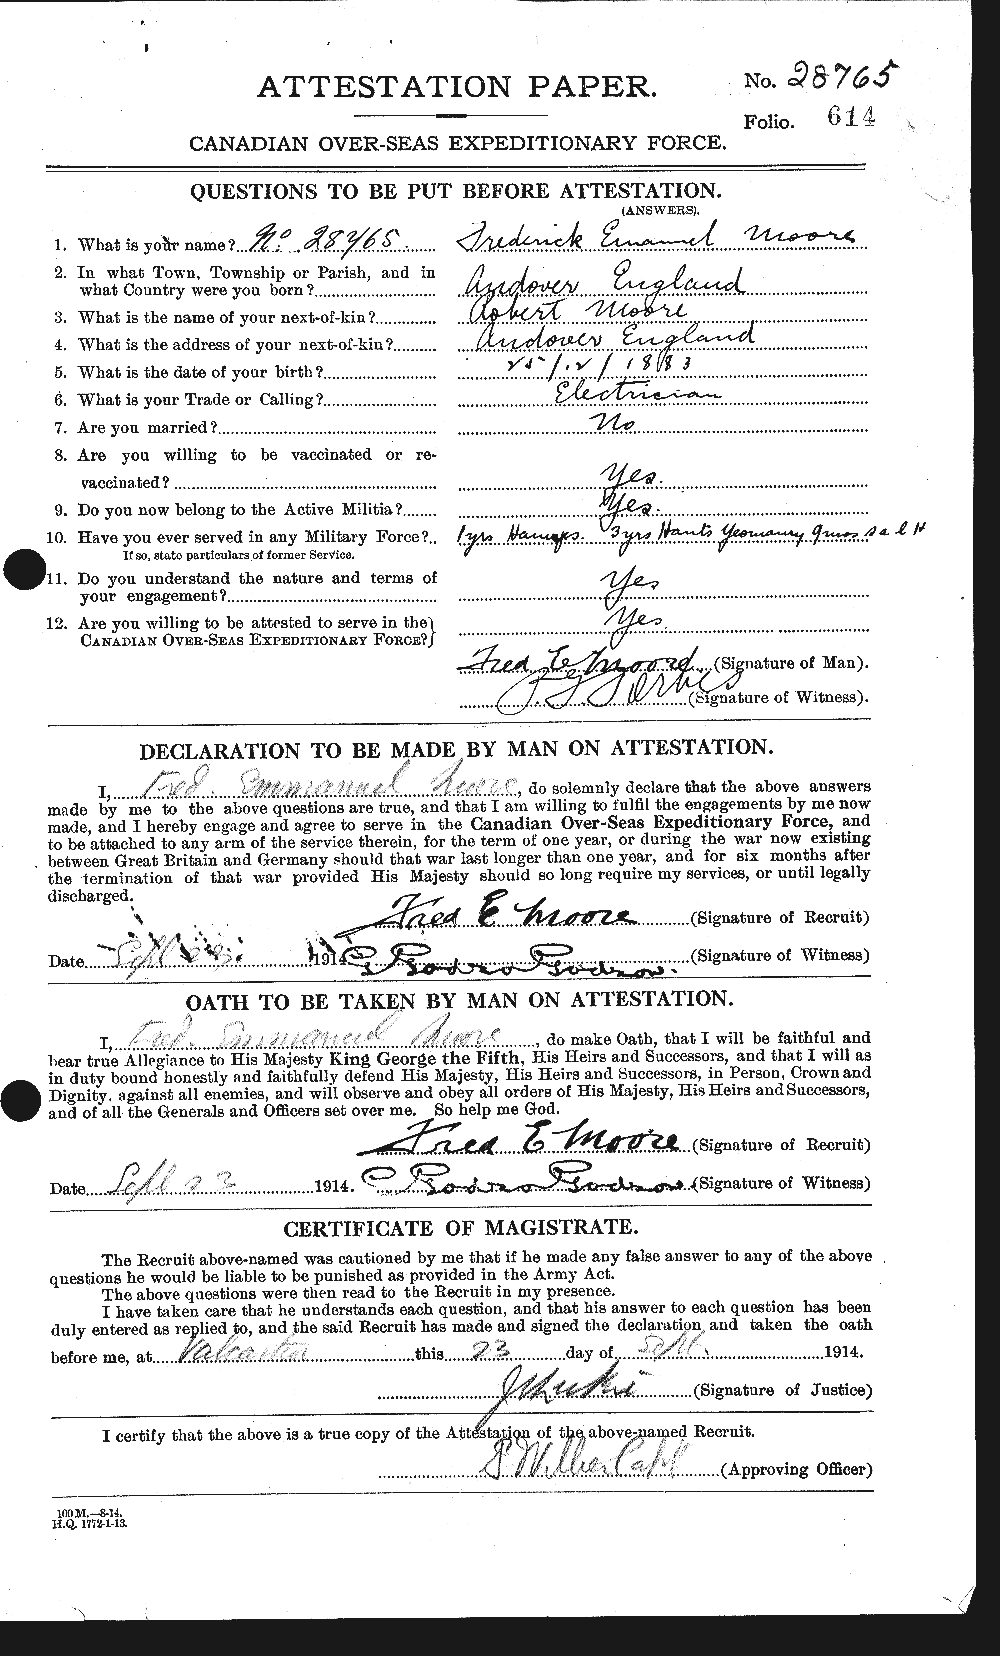 Personnel Records of the First World War - CEF 506746a